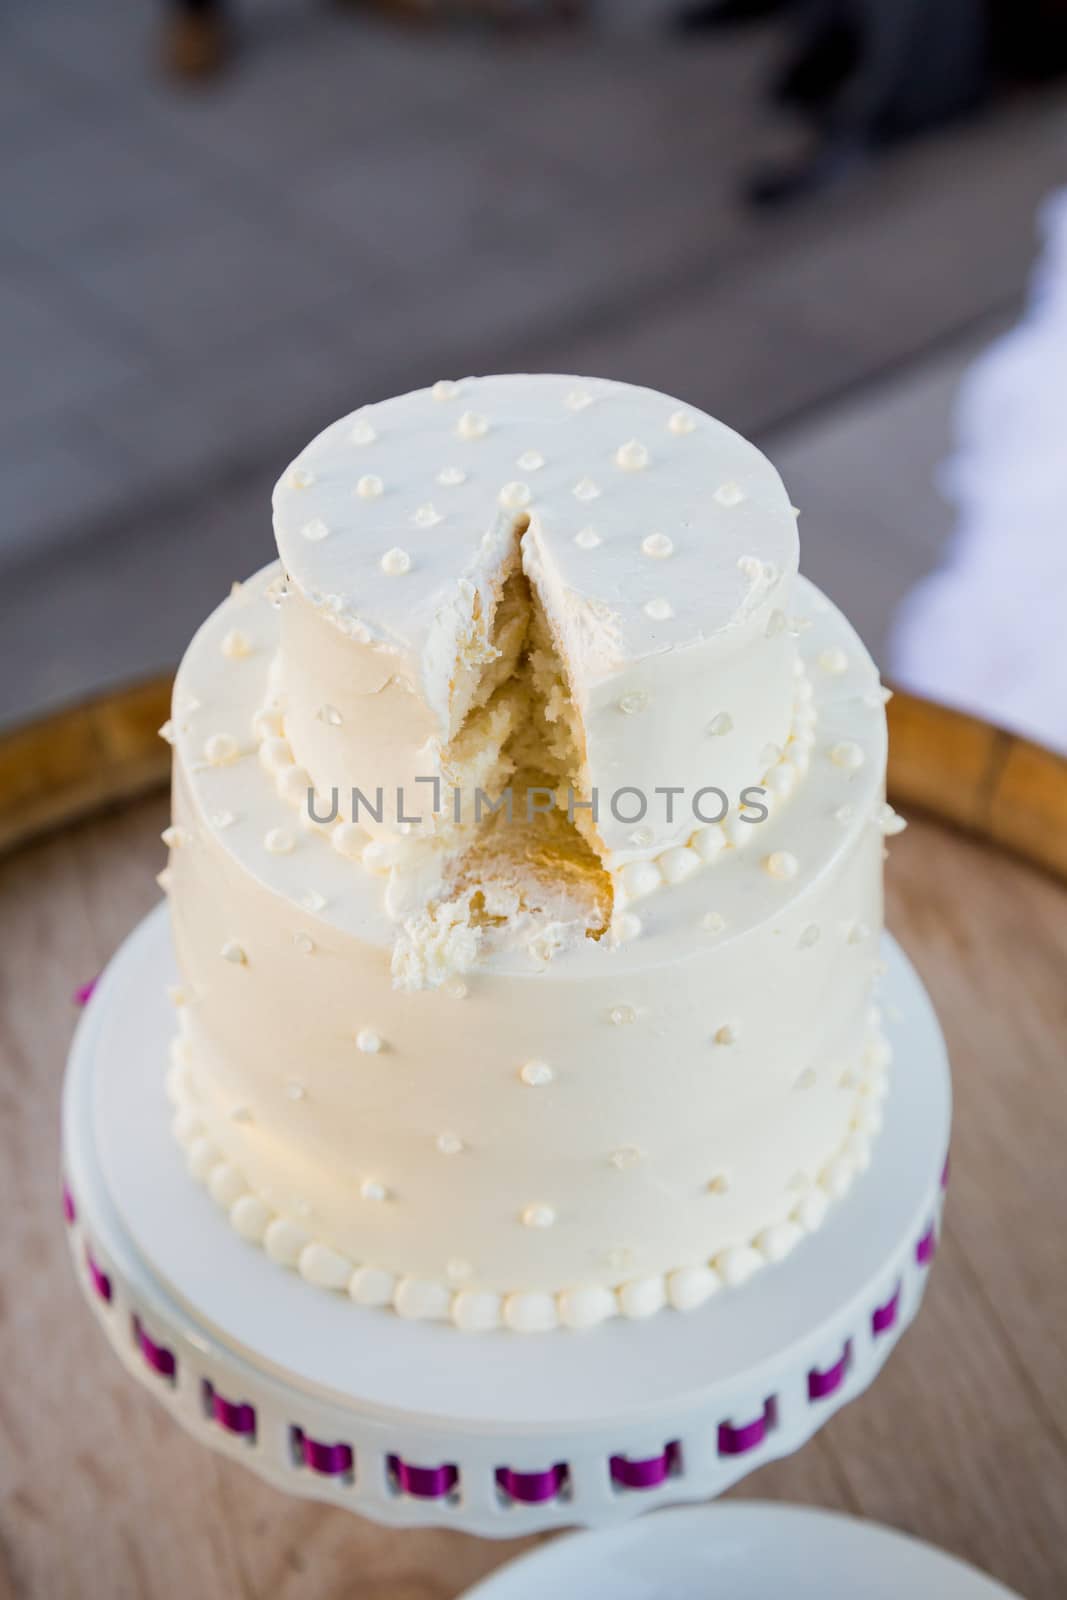 A white wedding cake is cut after the bride and groom cut the cake at their wedding reception.